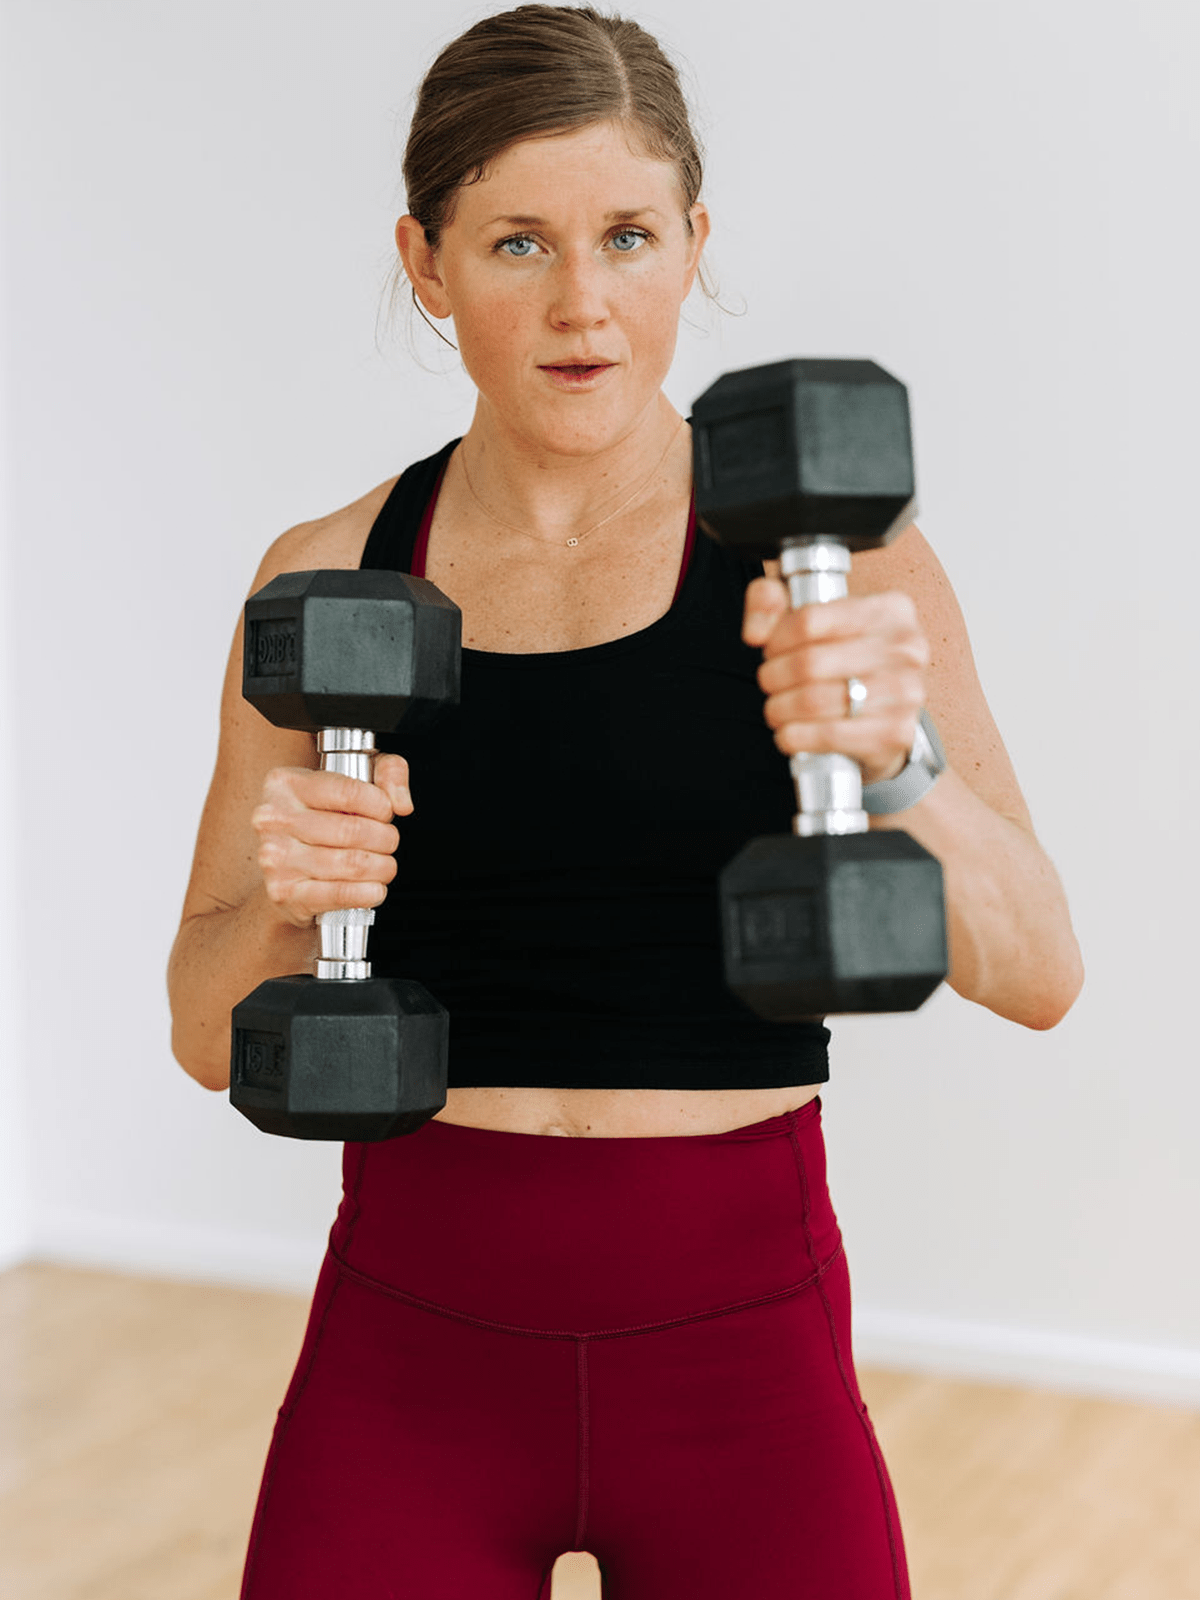 Sculpt Your Arms with a Quick 5-Minute Home Workout